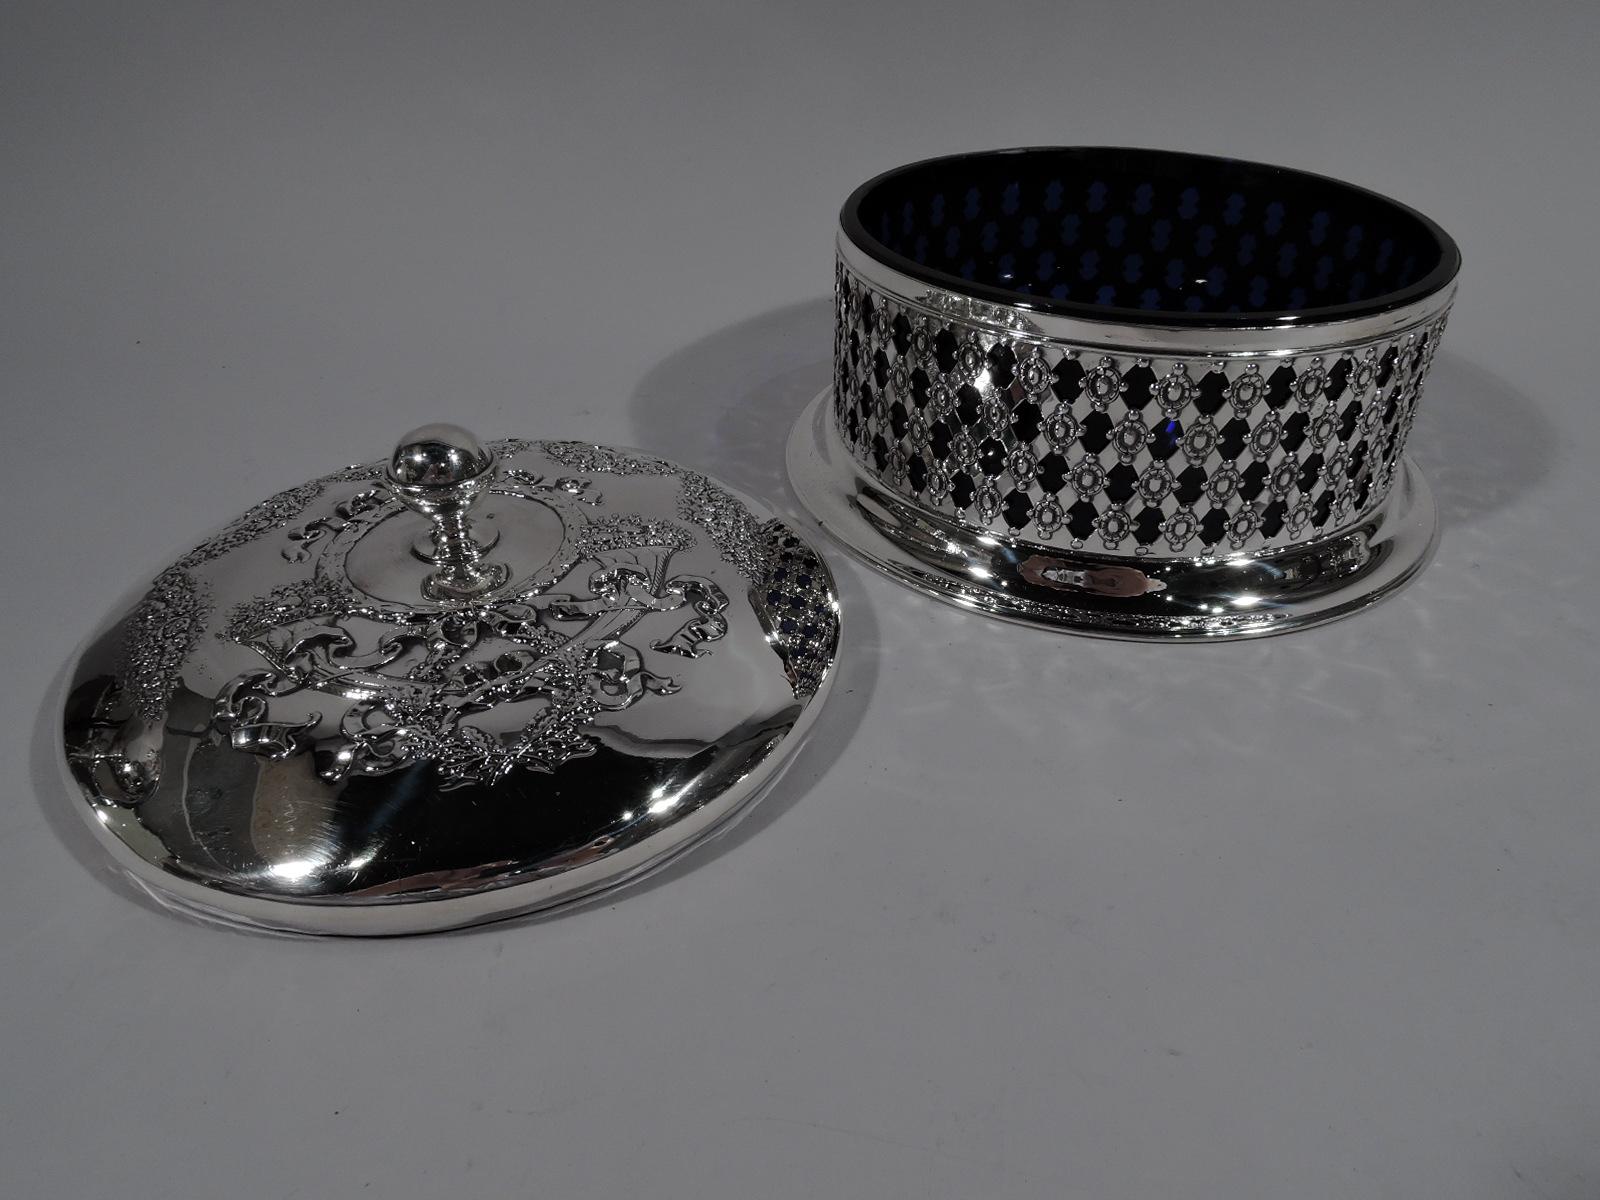 Turn-of-the-century American Edwardian sterling silver box. Retailed by Black, Starr & Frost in New York. Round with plain and solid spread foot. Sides open basket-weave with beaded flower heads. Cover gently raised with ball finial chased ornament